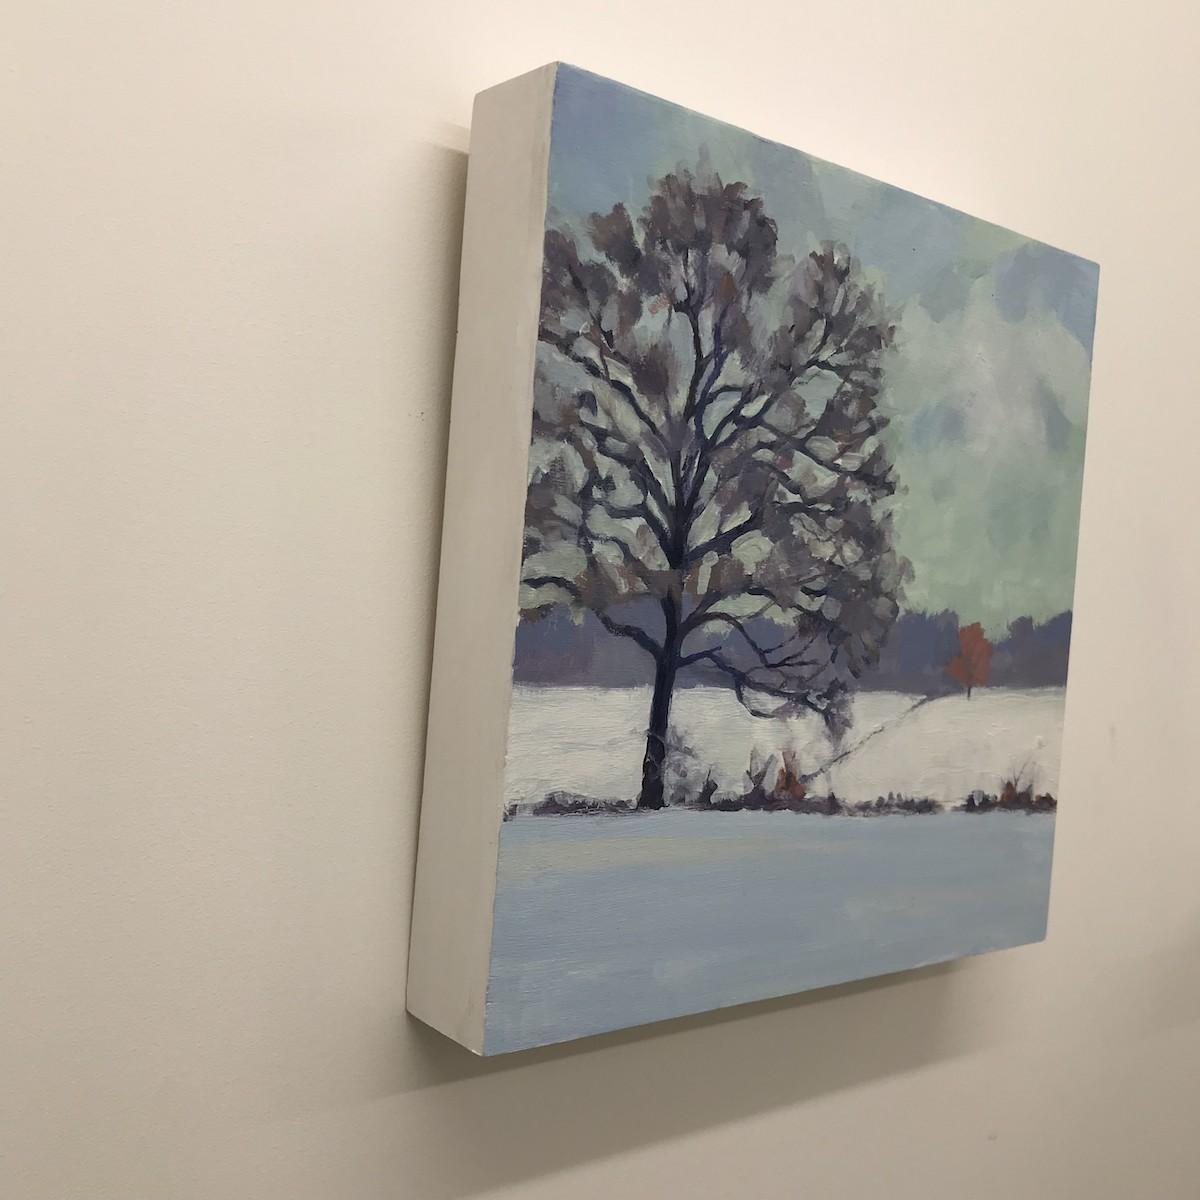 Snow in the Fields by Margaret Crutchley [2021]
original and hand signed by the artist 
Acrylic on cradled wood panel
Image size: H:25 cm x W:25 cm
Complete Size of Unframed Work: H:25 cm x W:25 cm x D:4cm
Sold Unframed
Please note that insitu